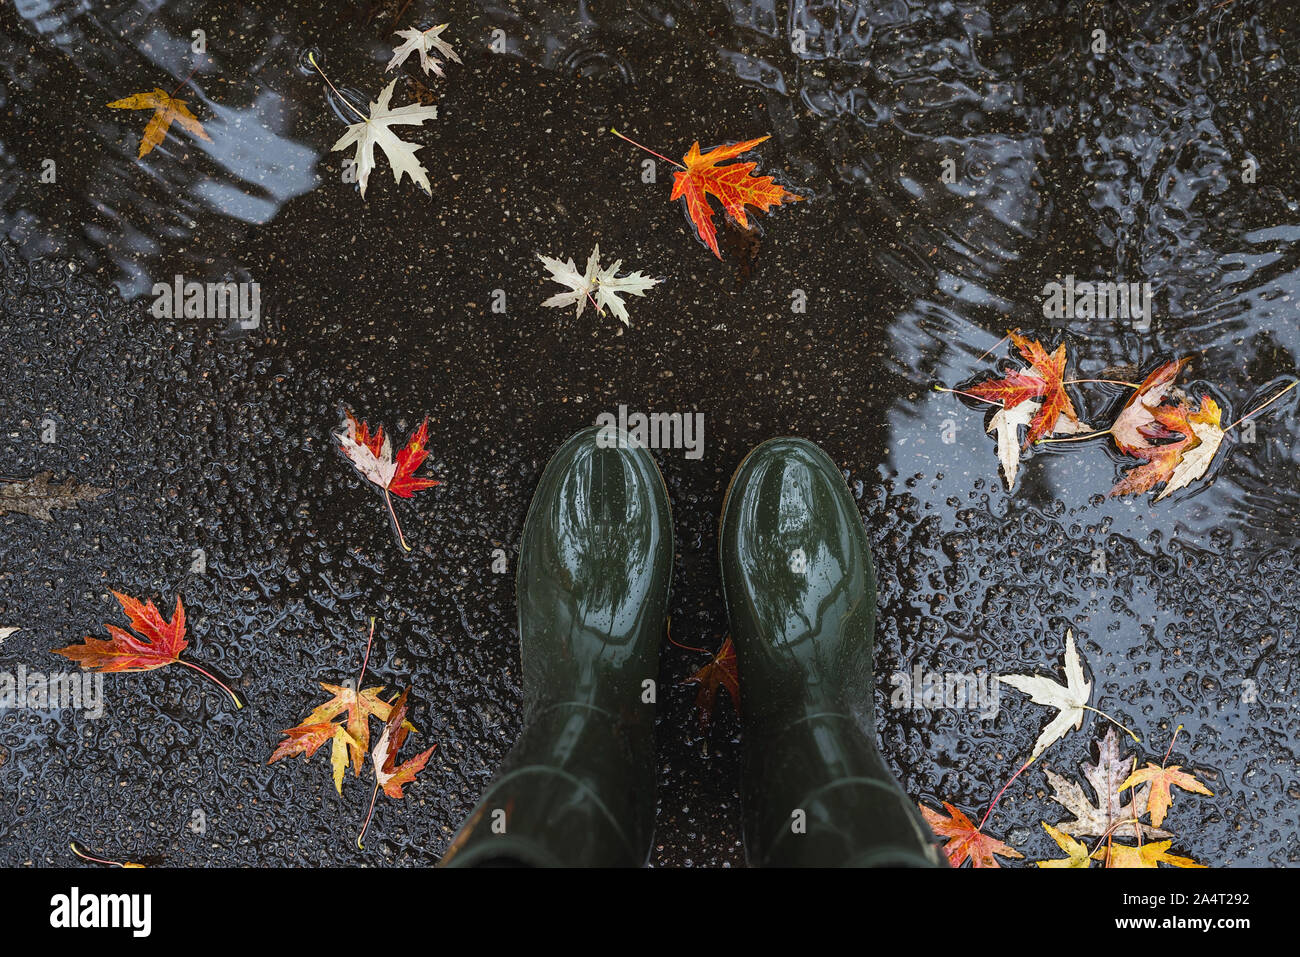 Feet in olive green rubber boots standing in a puddle with fallen leaves. Stock Photo